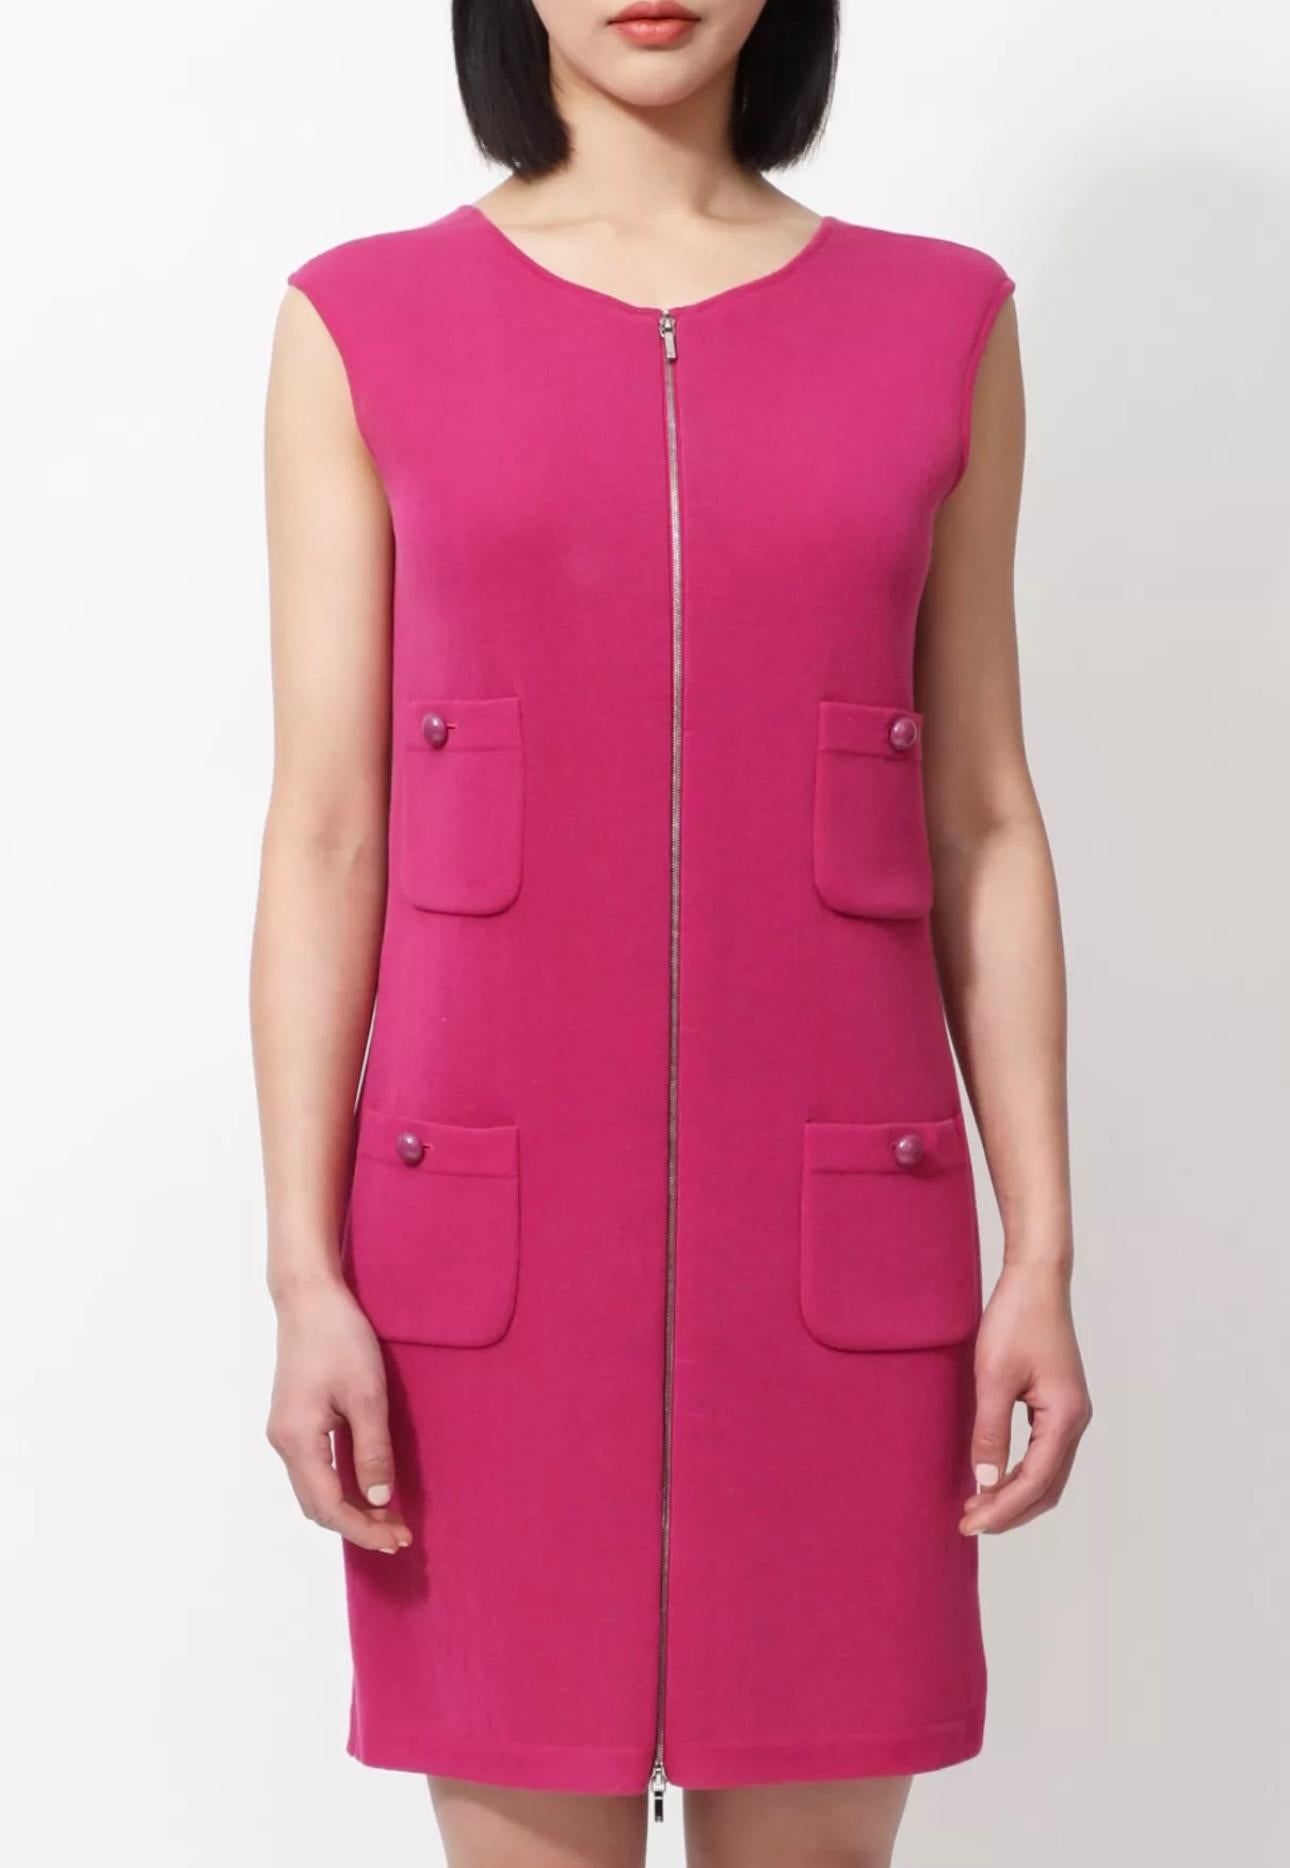 Chanel Stylish Fuchsia Dress with CC Buttons For Sale 3